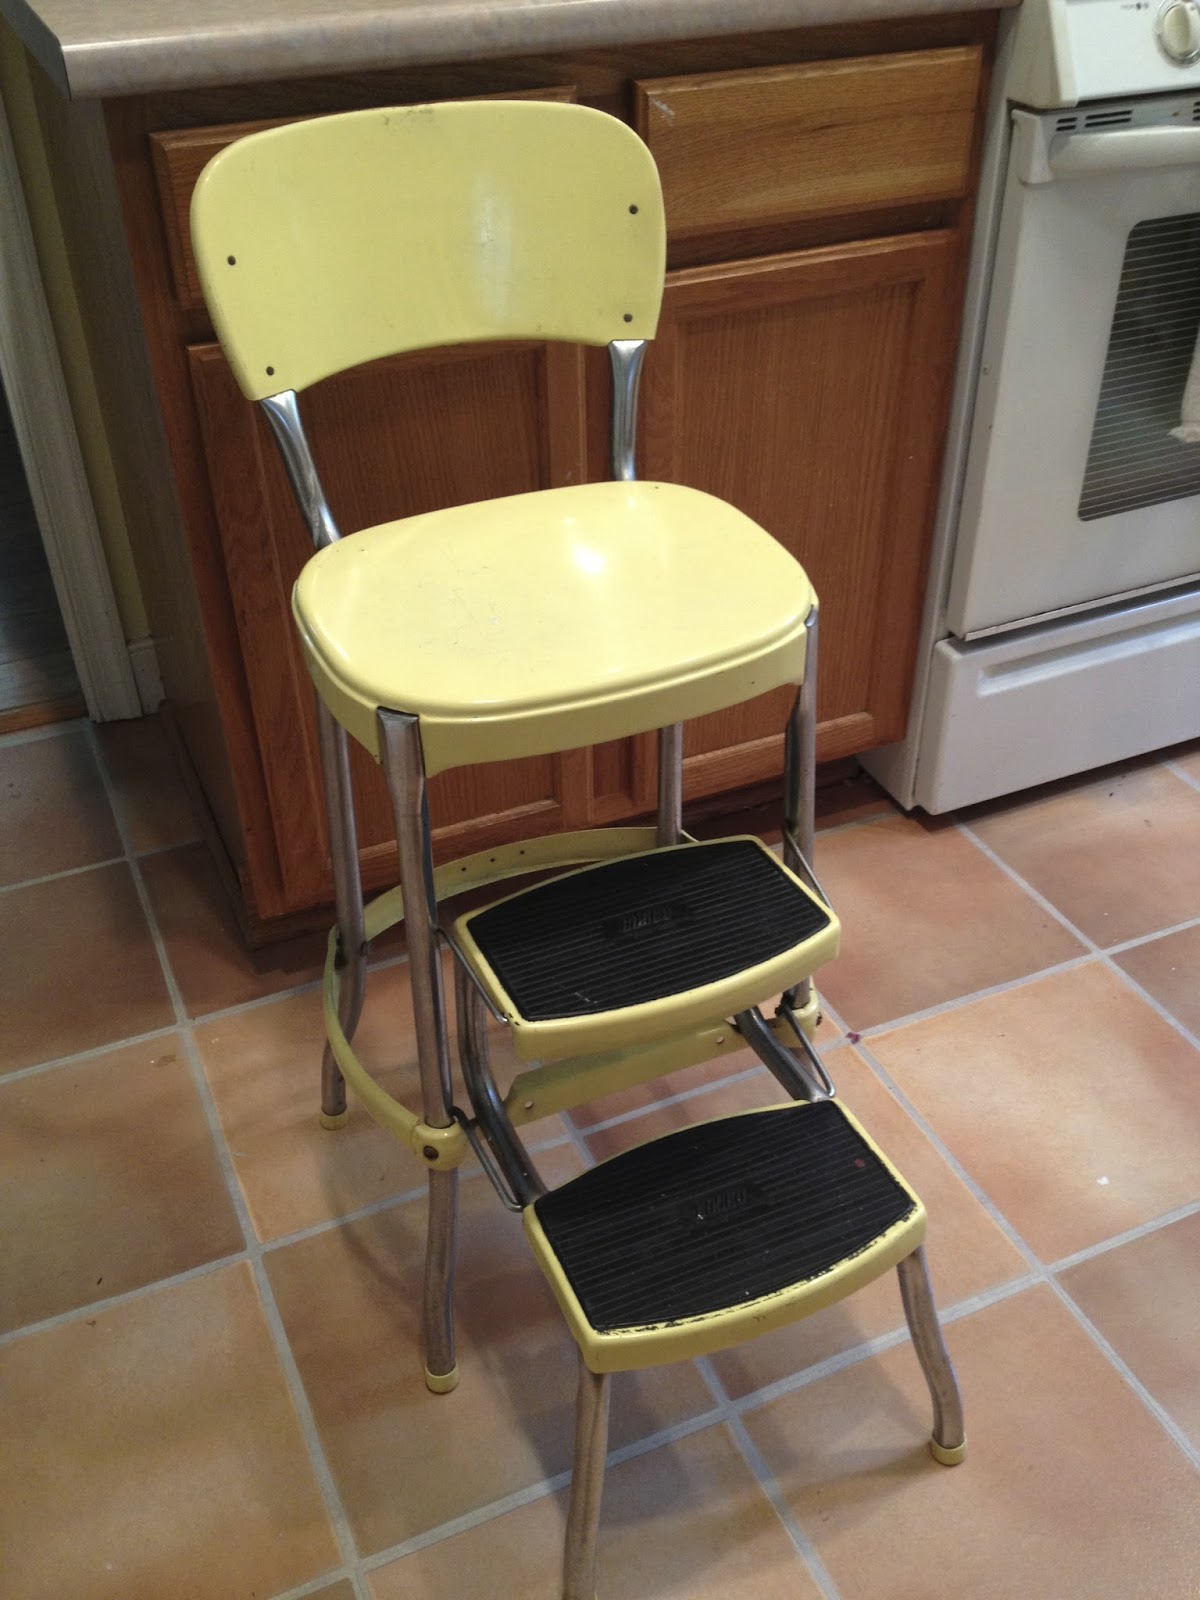 The Awesome Vintage Step Stool I Found On Ebay My Grandmother Had One